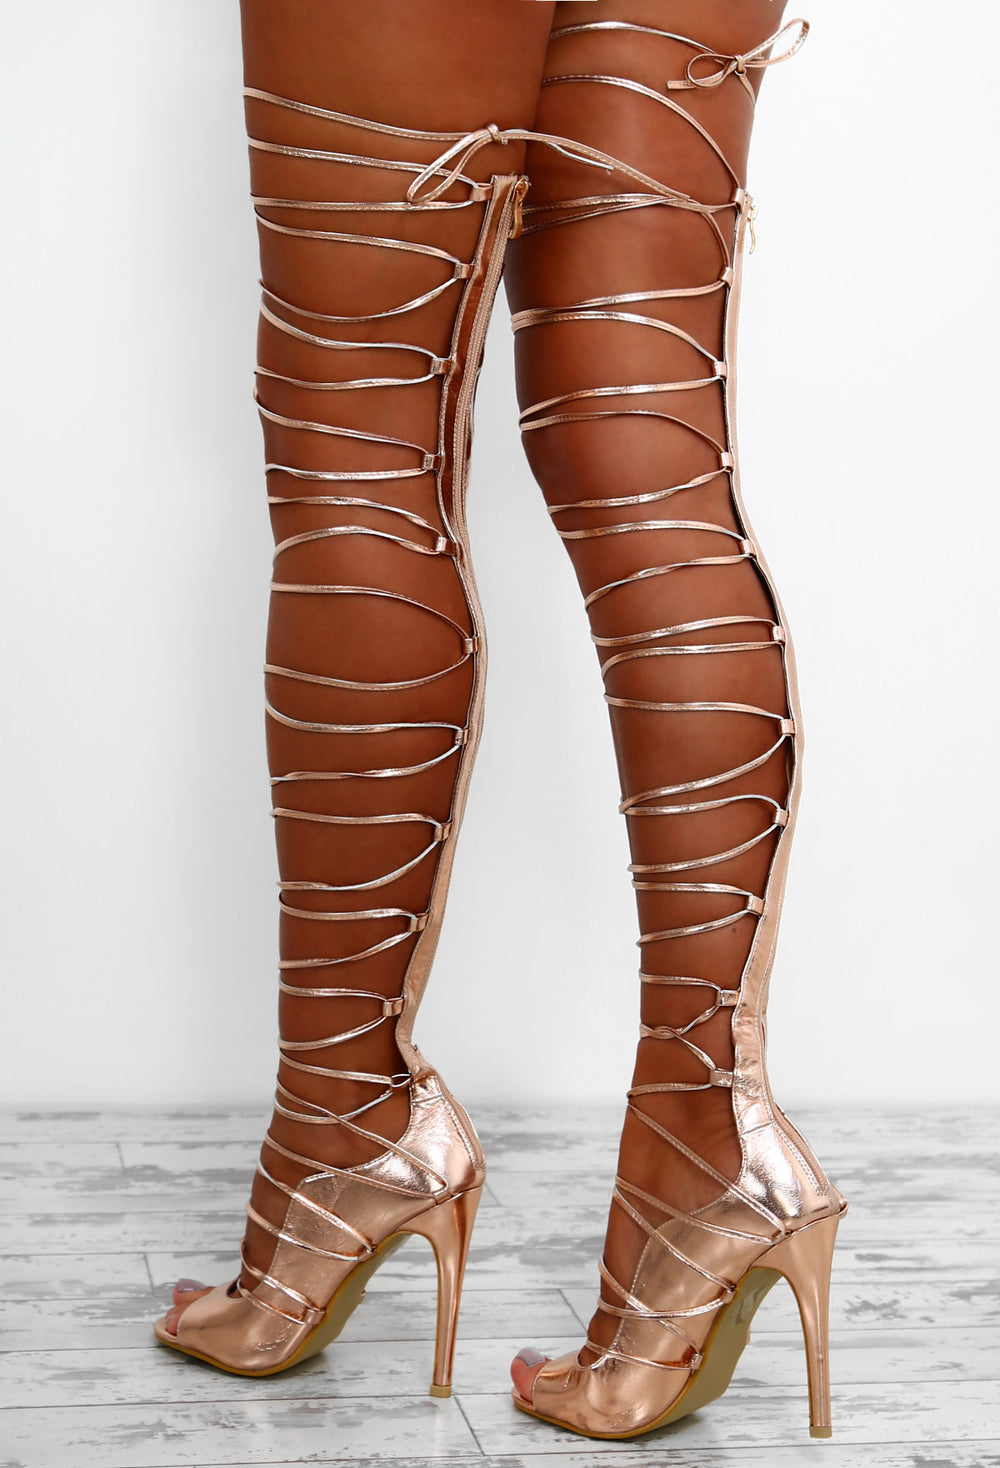 thigh high lace up heels